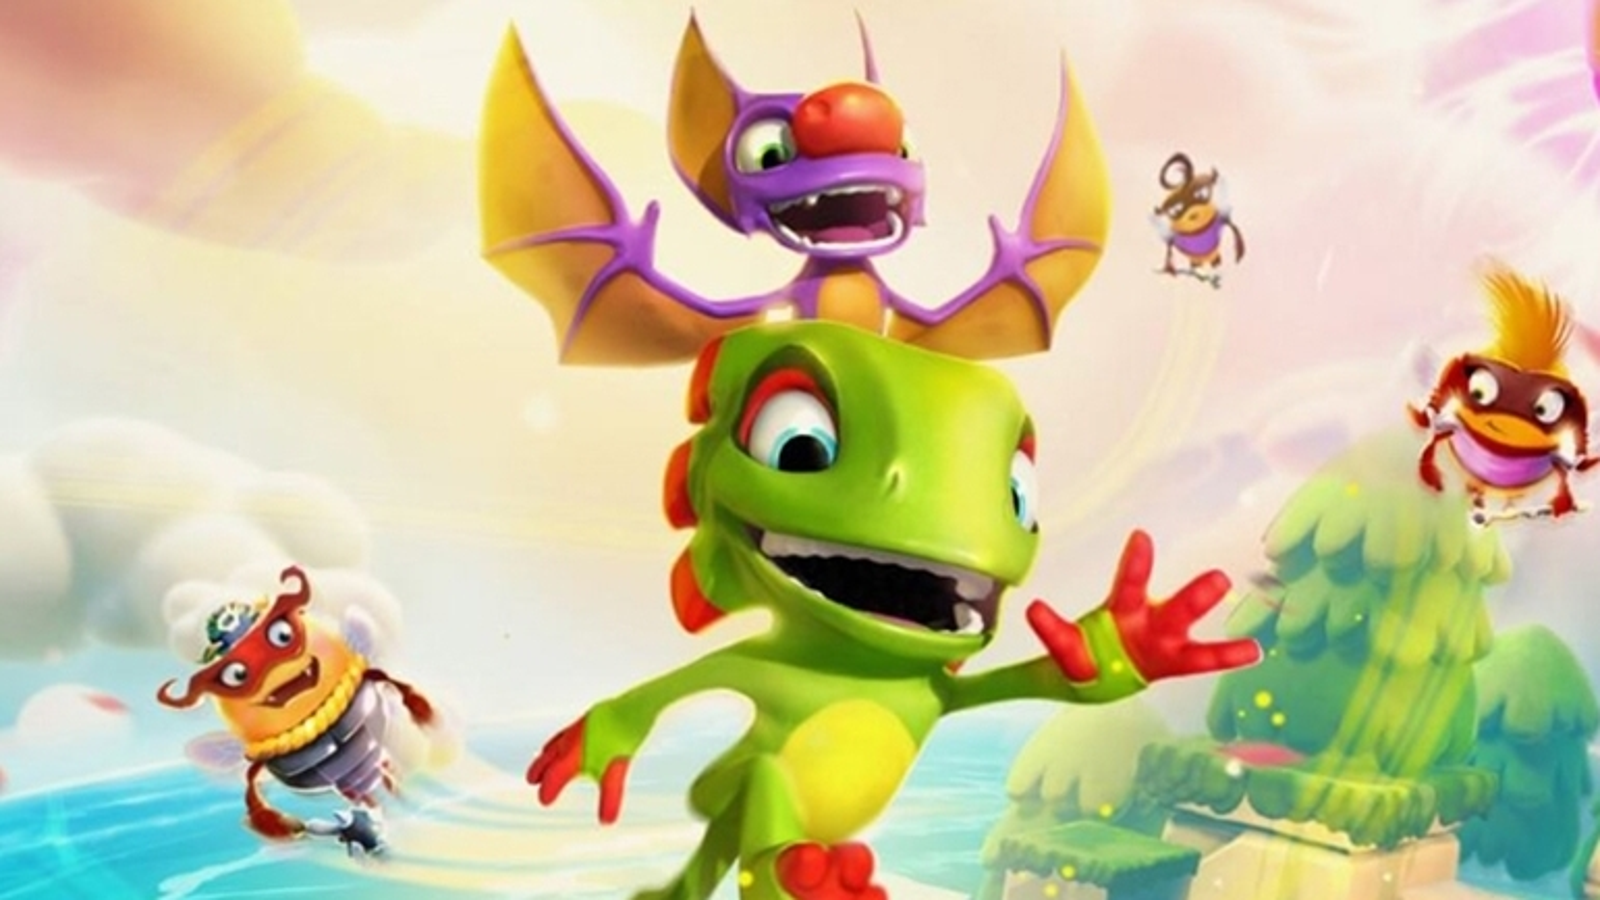 Yooka-Laylee and the spotless superb Impossible elsewhere Switch, Lair: on